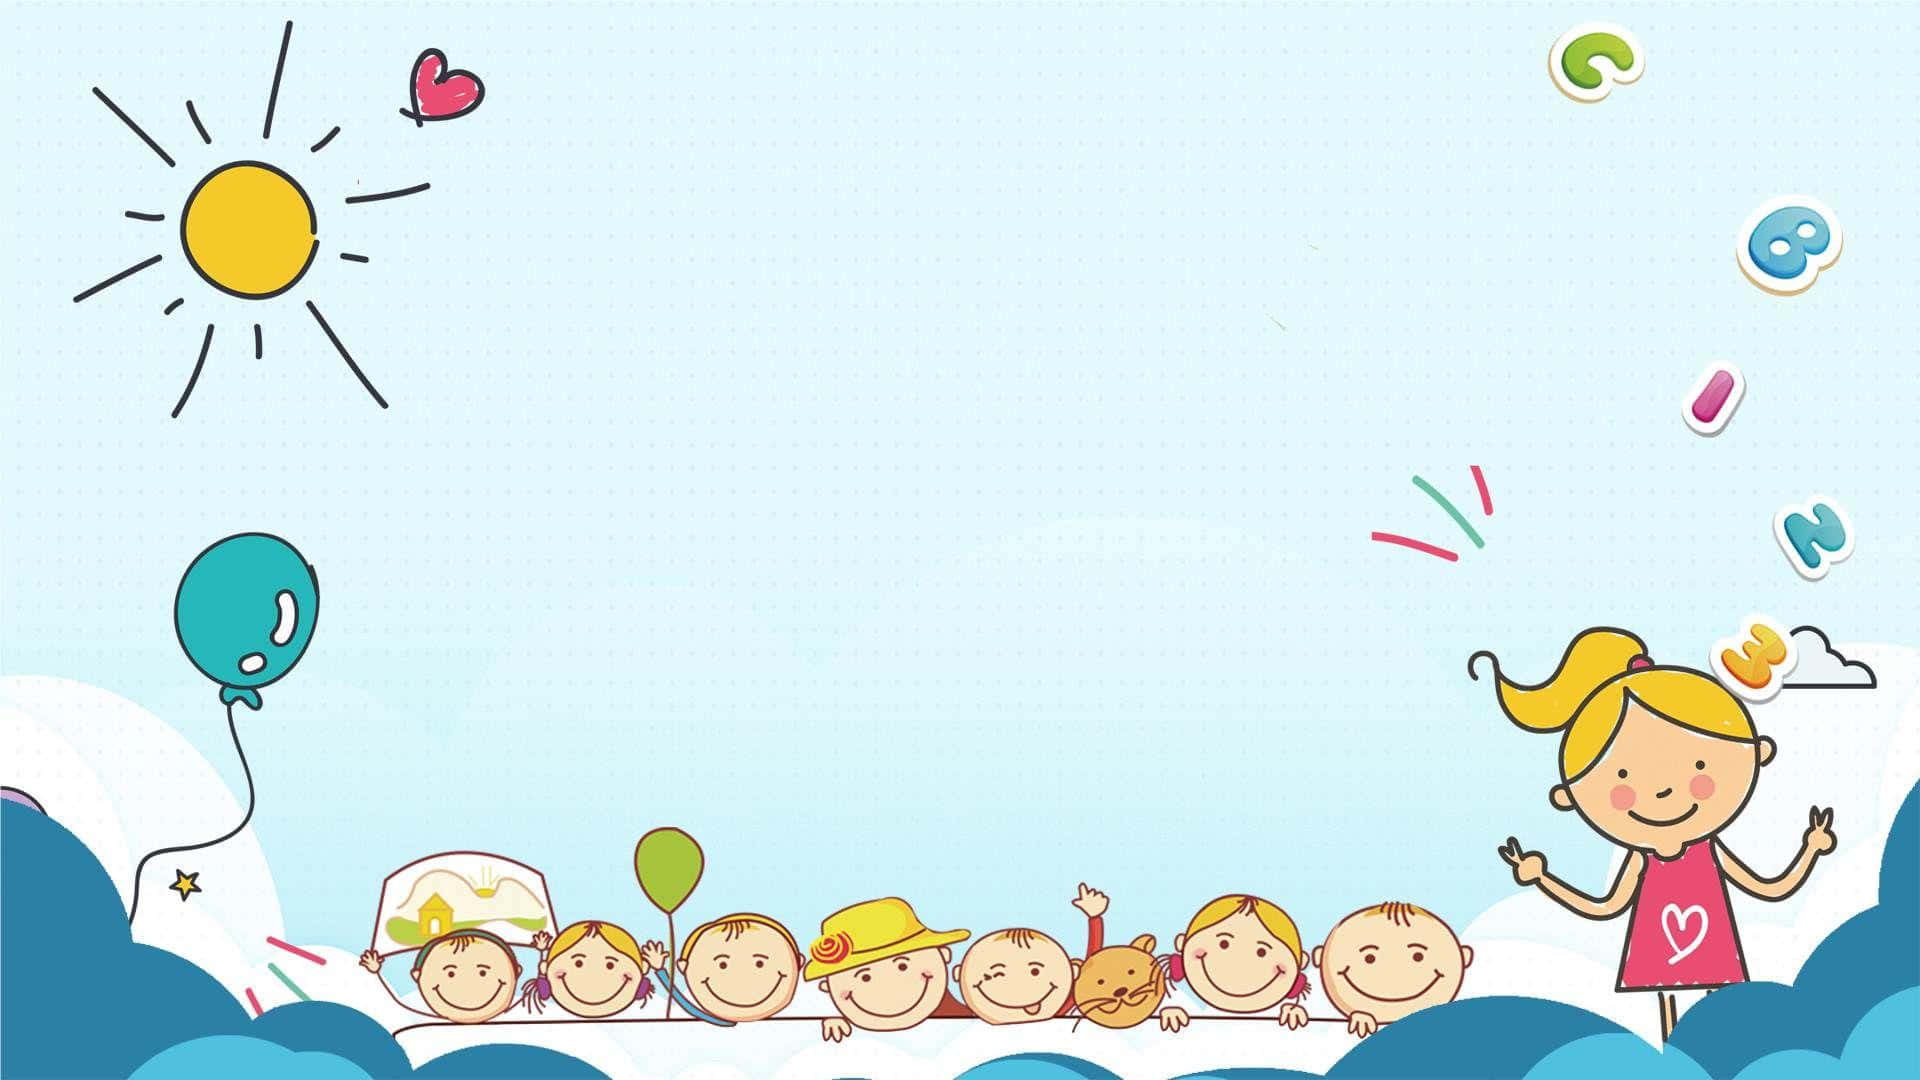 A Cartoon Of A Girl With Balloons And Children